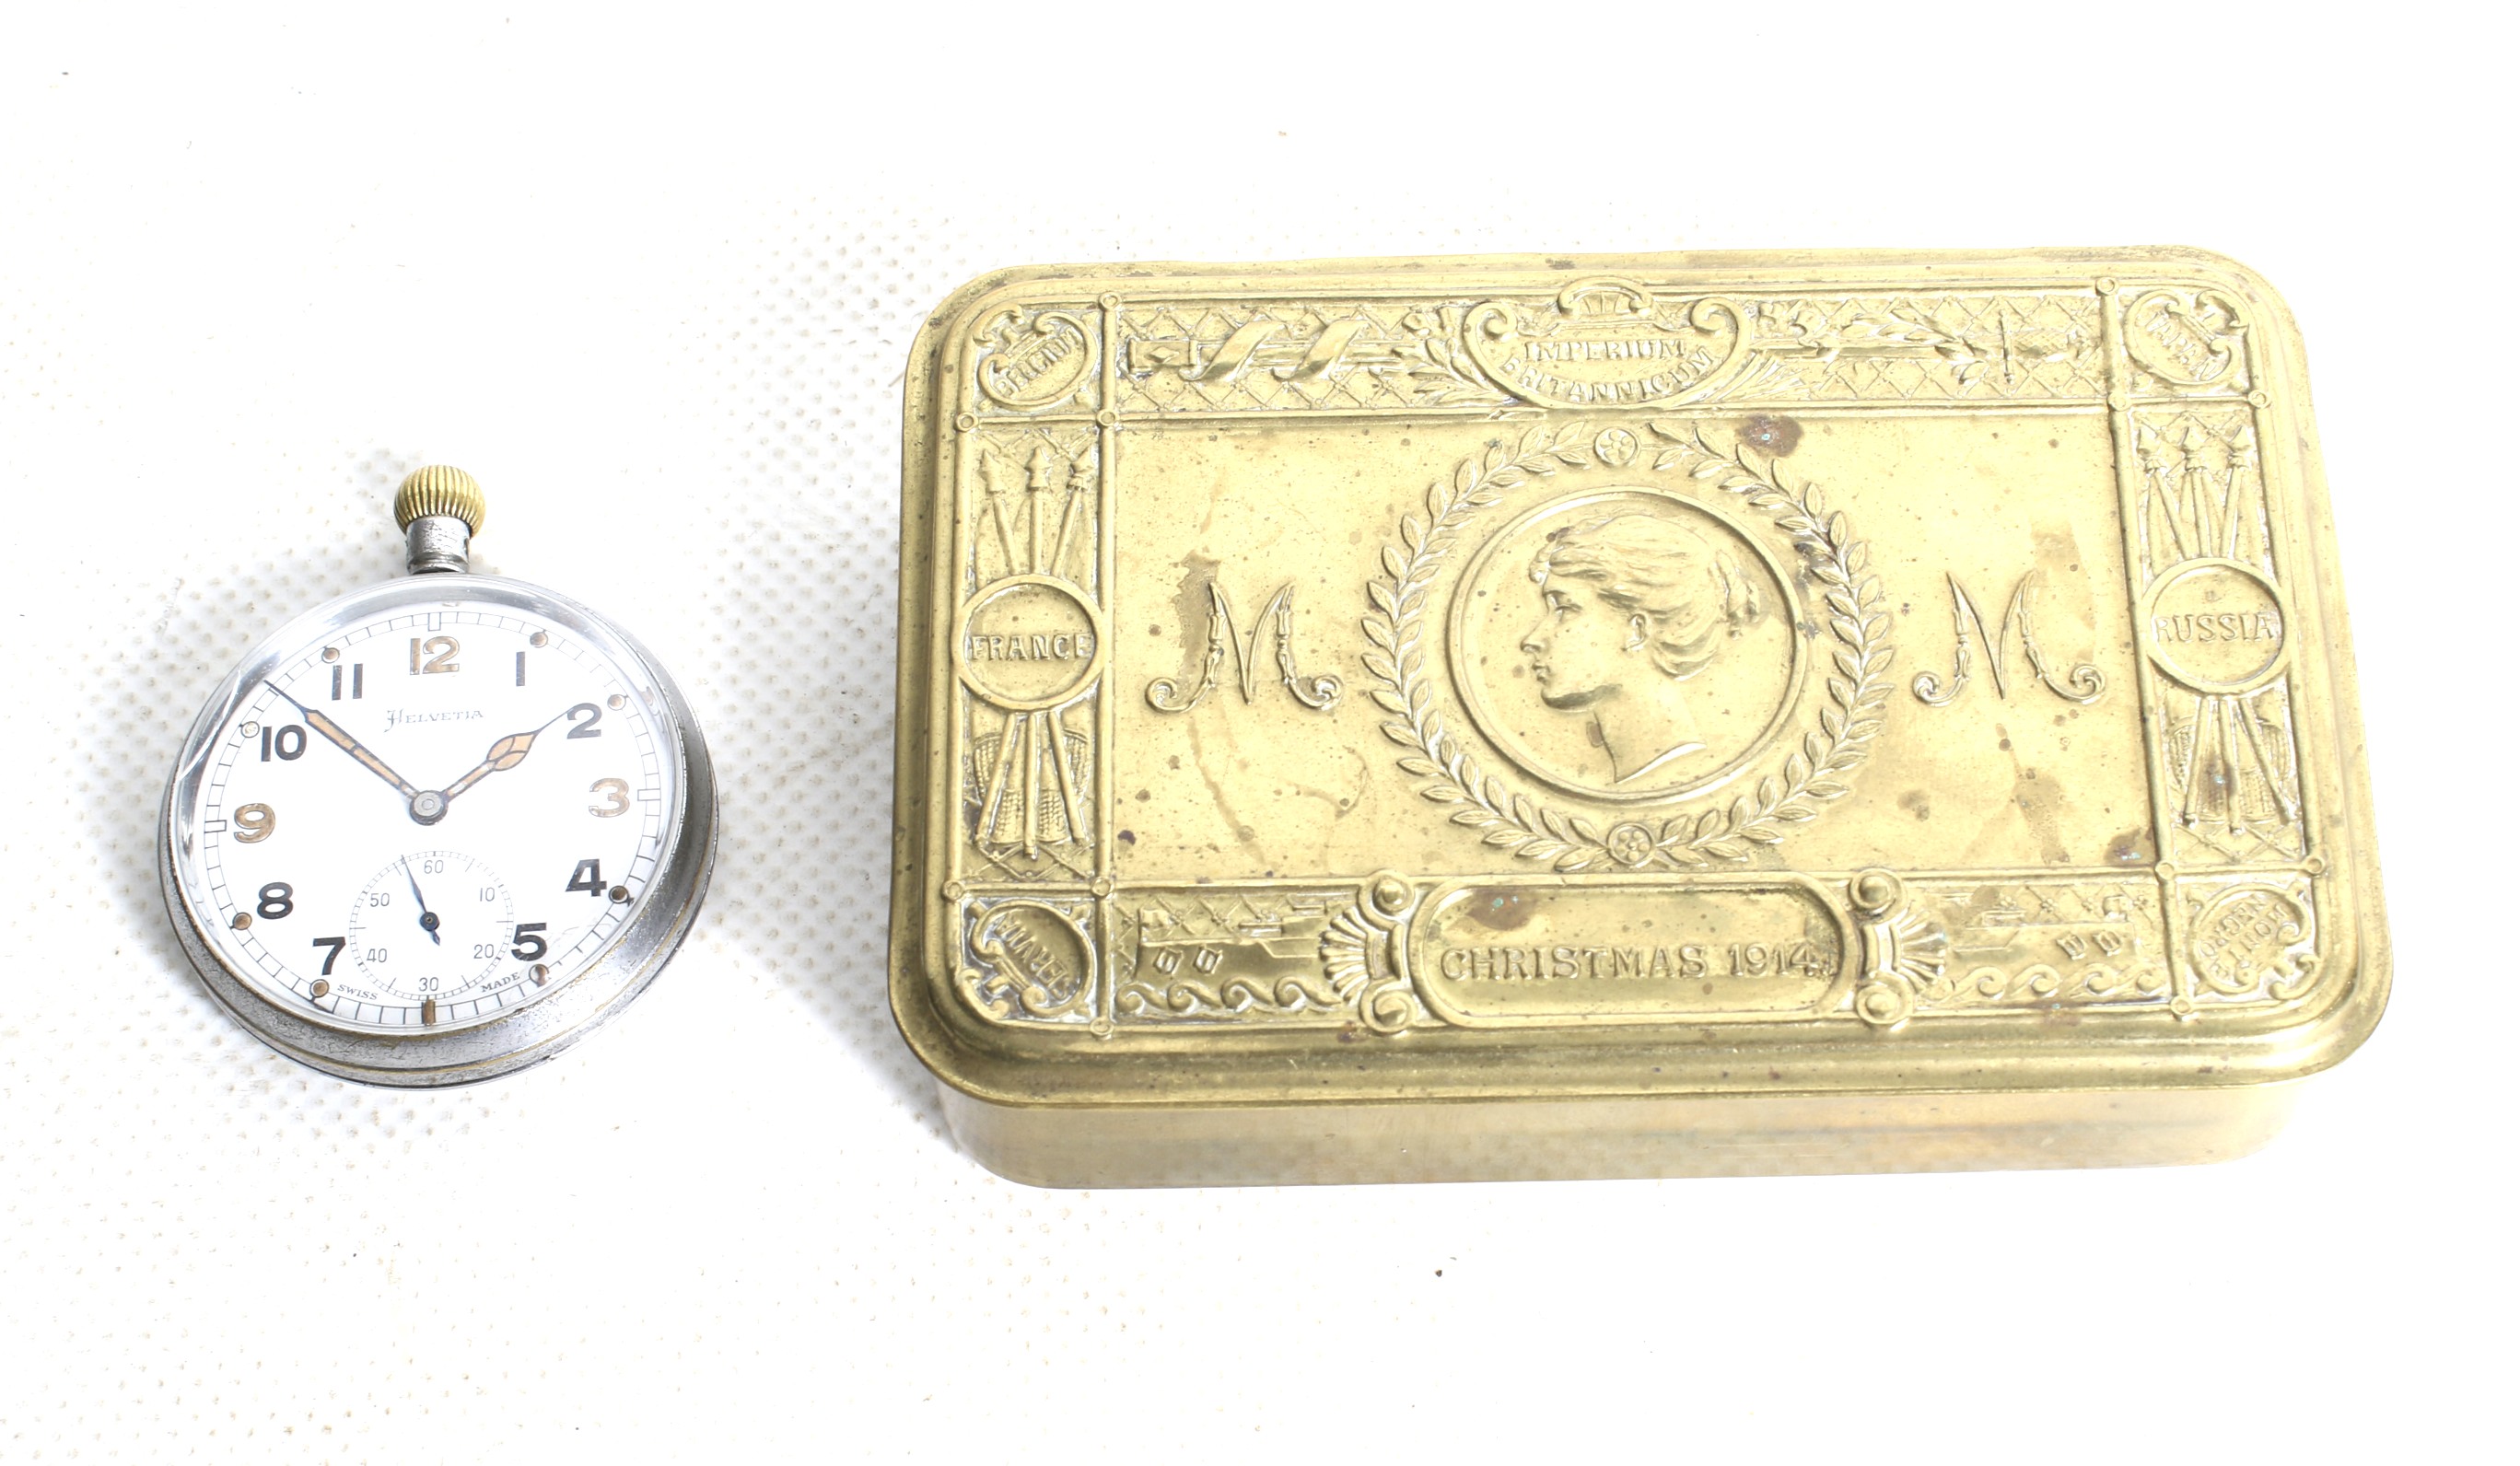 A 1914 Princess Mary Christmas tin and a WWII British military pocket watch.